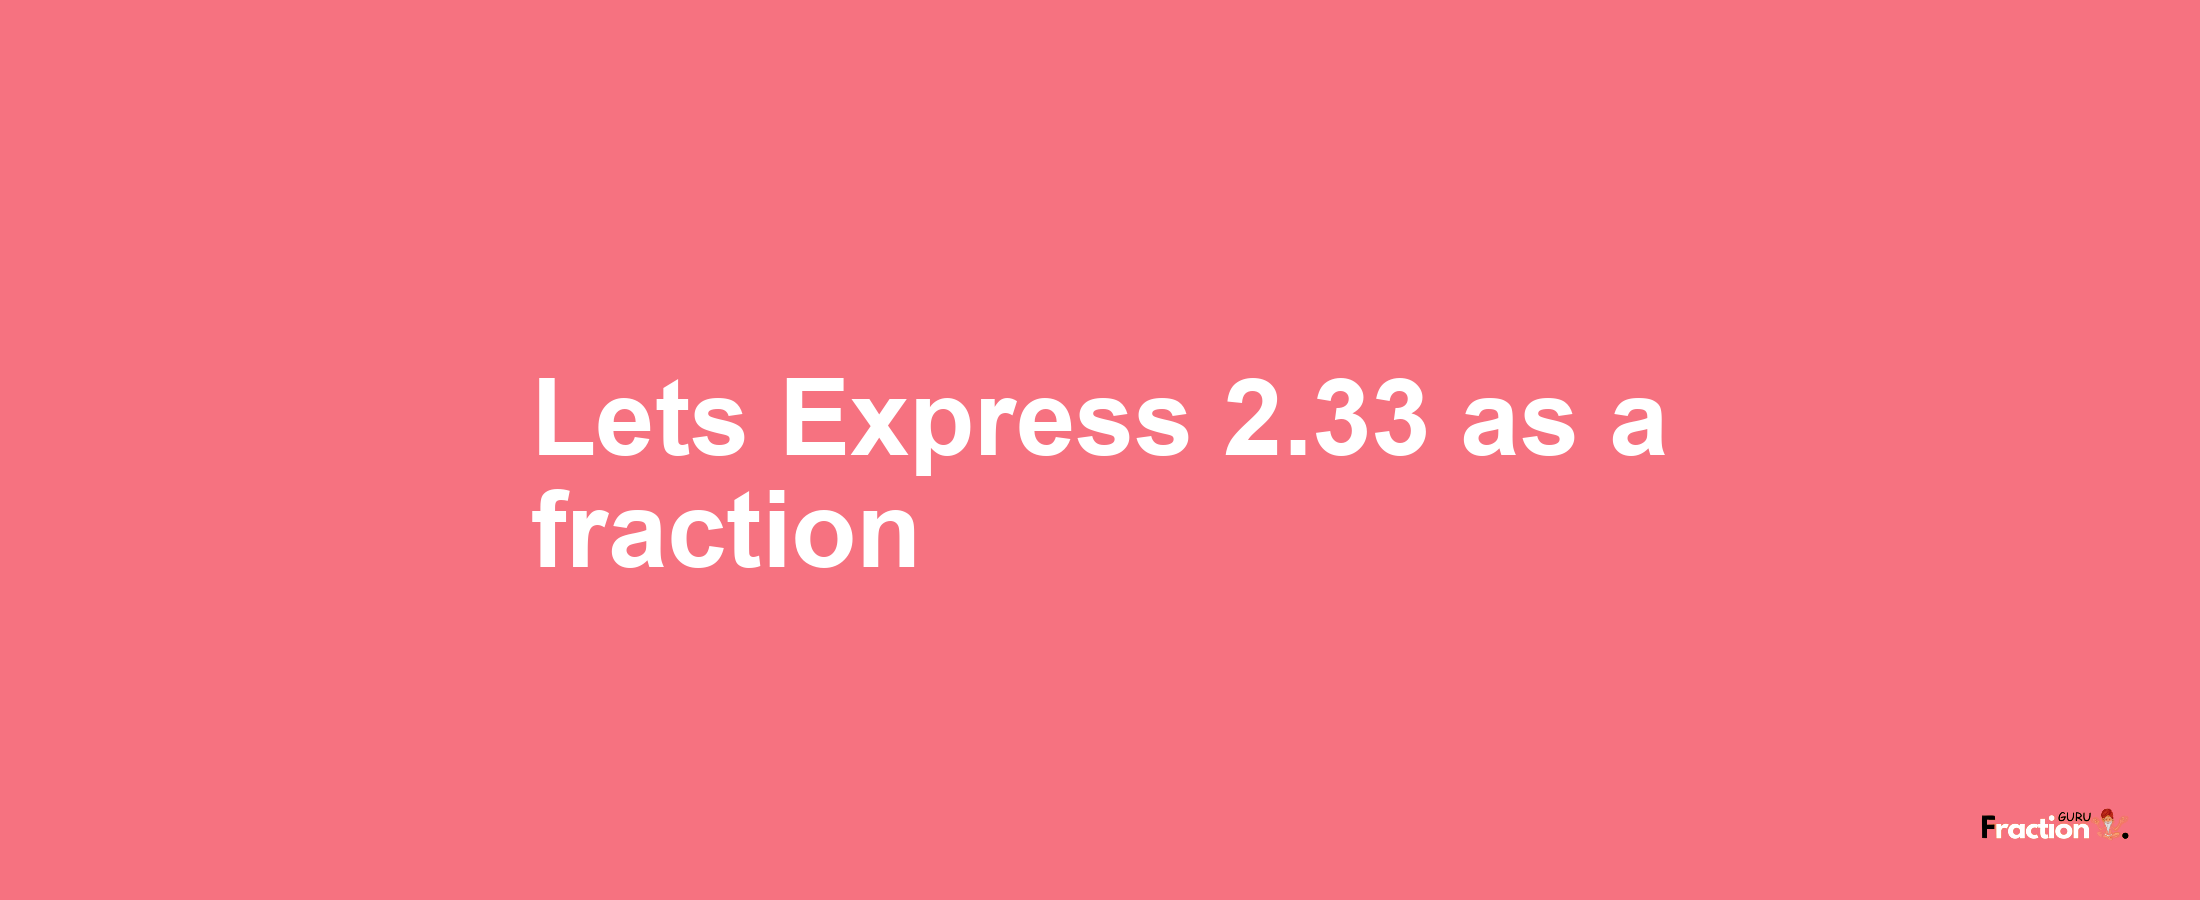 Lets Express 2.33 as afraction